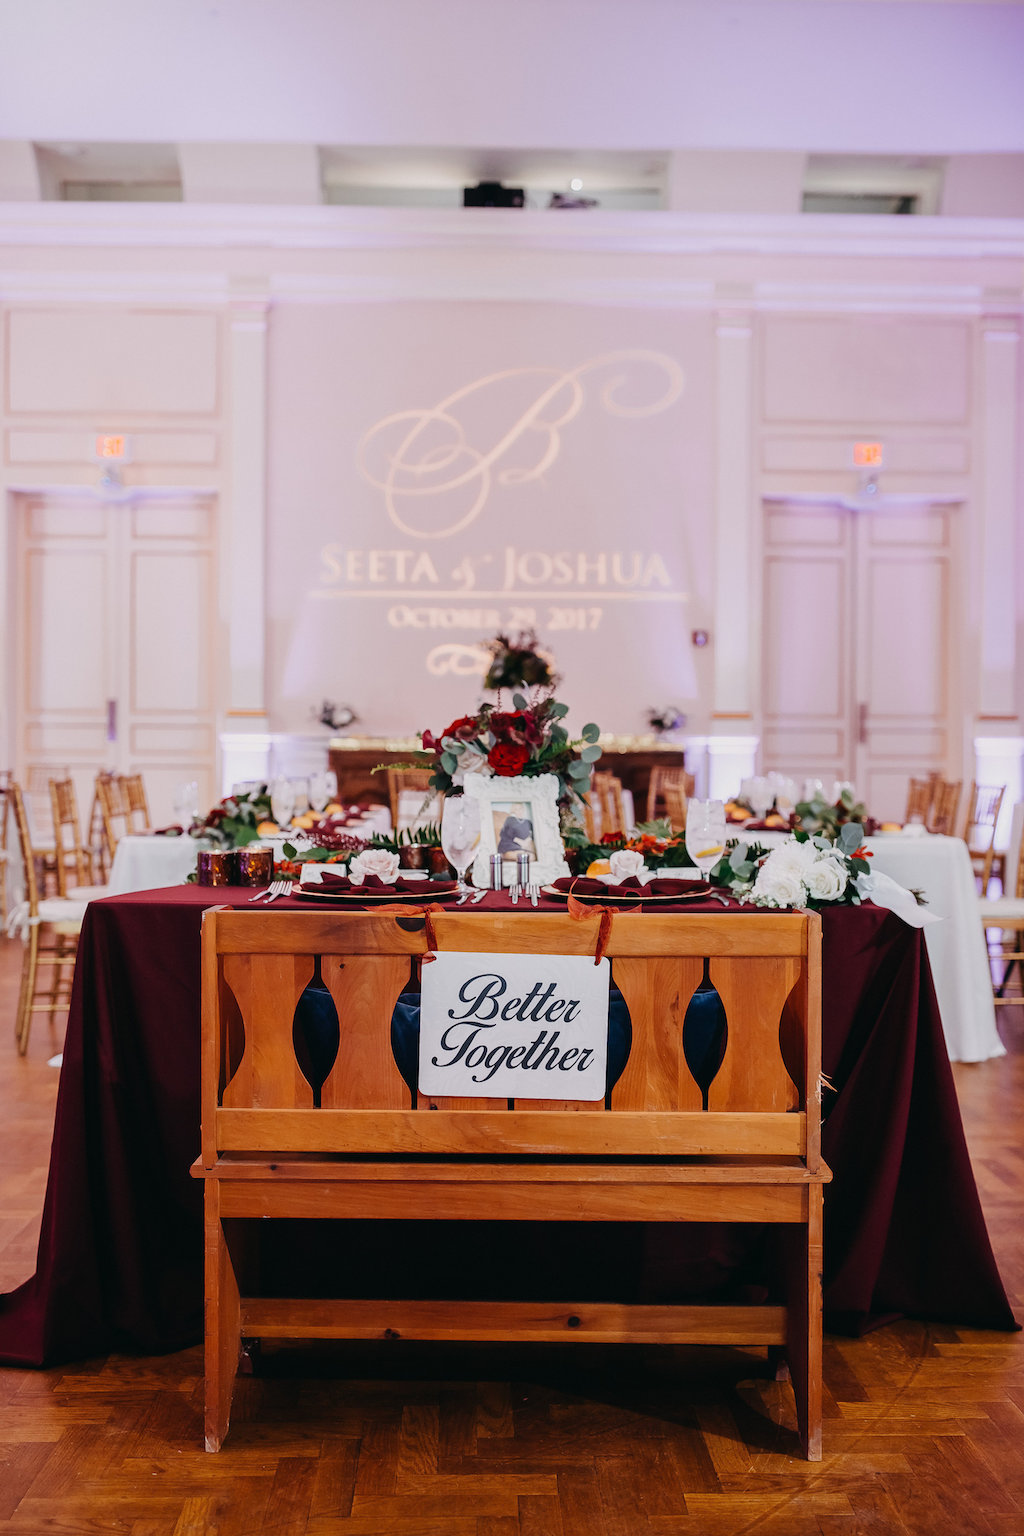 Ballroom Wedding Reception Sweetheart Table with Wooden Bench and Better Together Sign, Red Linens and Red and White with Greenery Centerpiece, and Custom Bride and Groom Name with Initial Gold Projection | Venue St Petersburg Museum of Fine Art